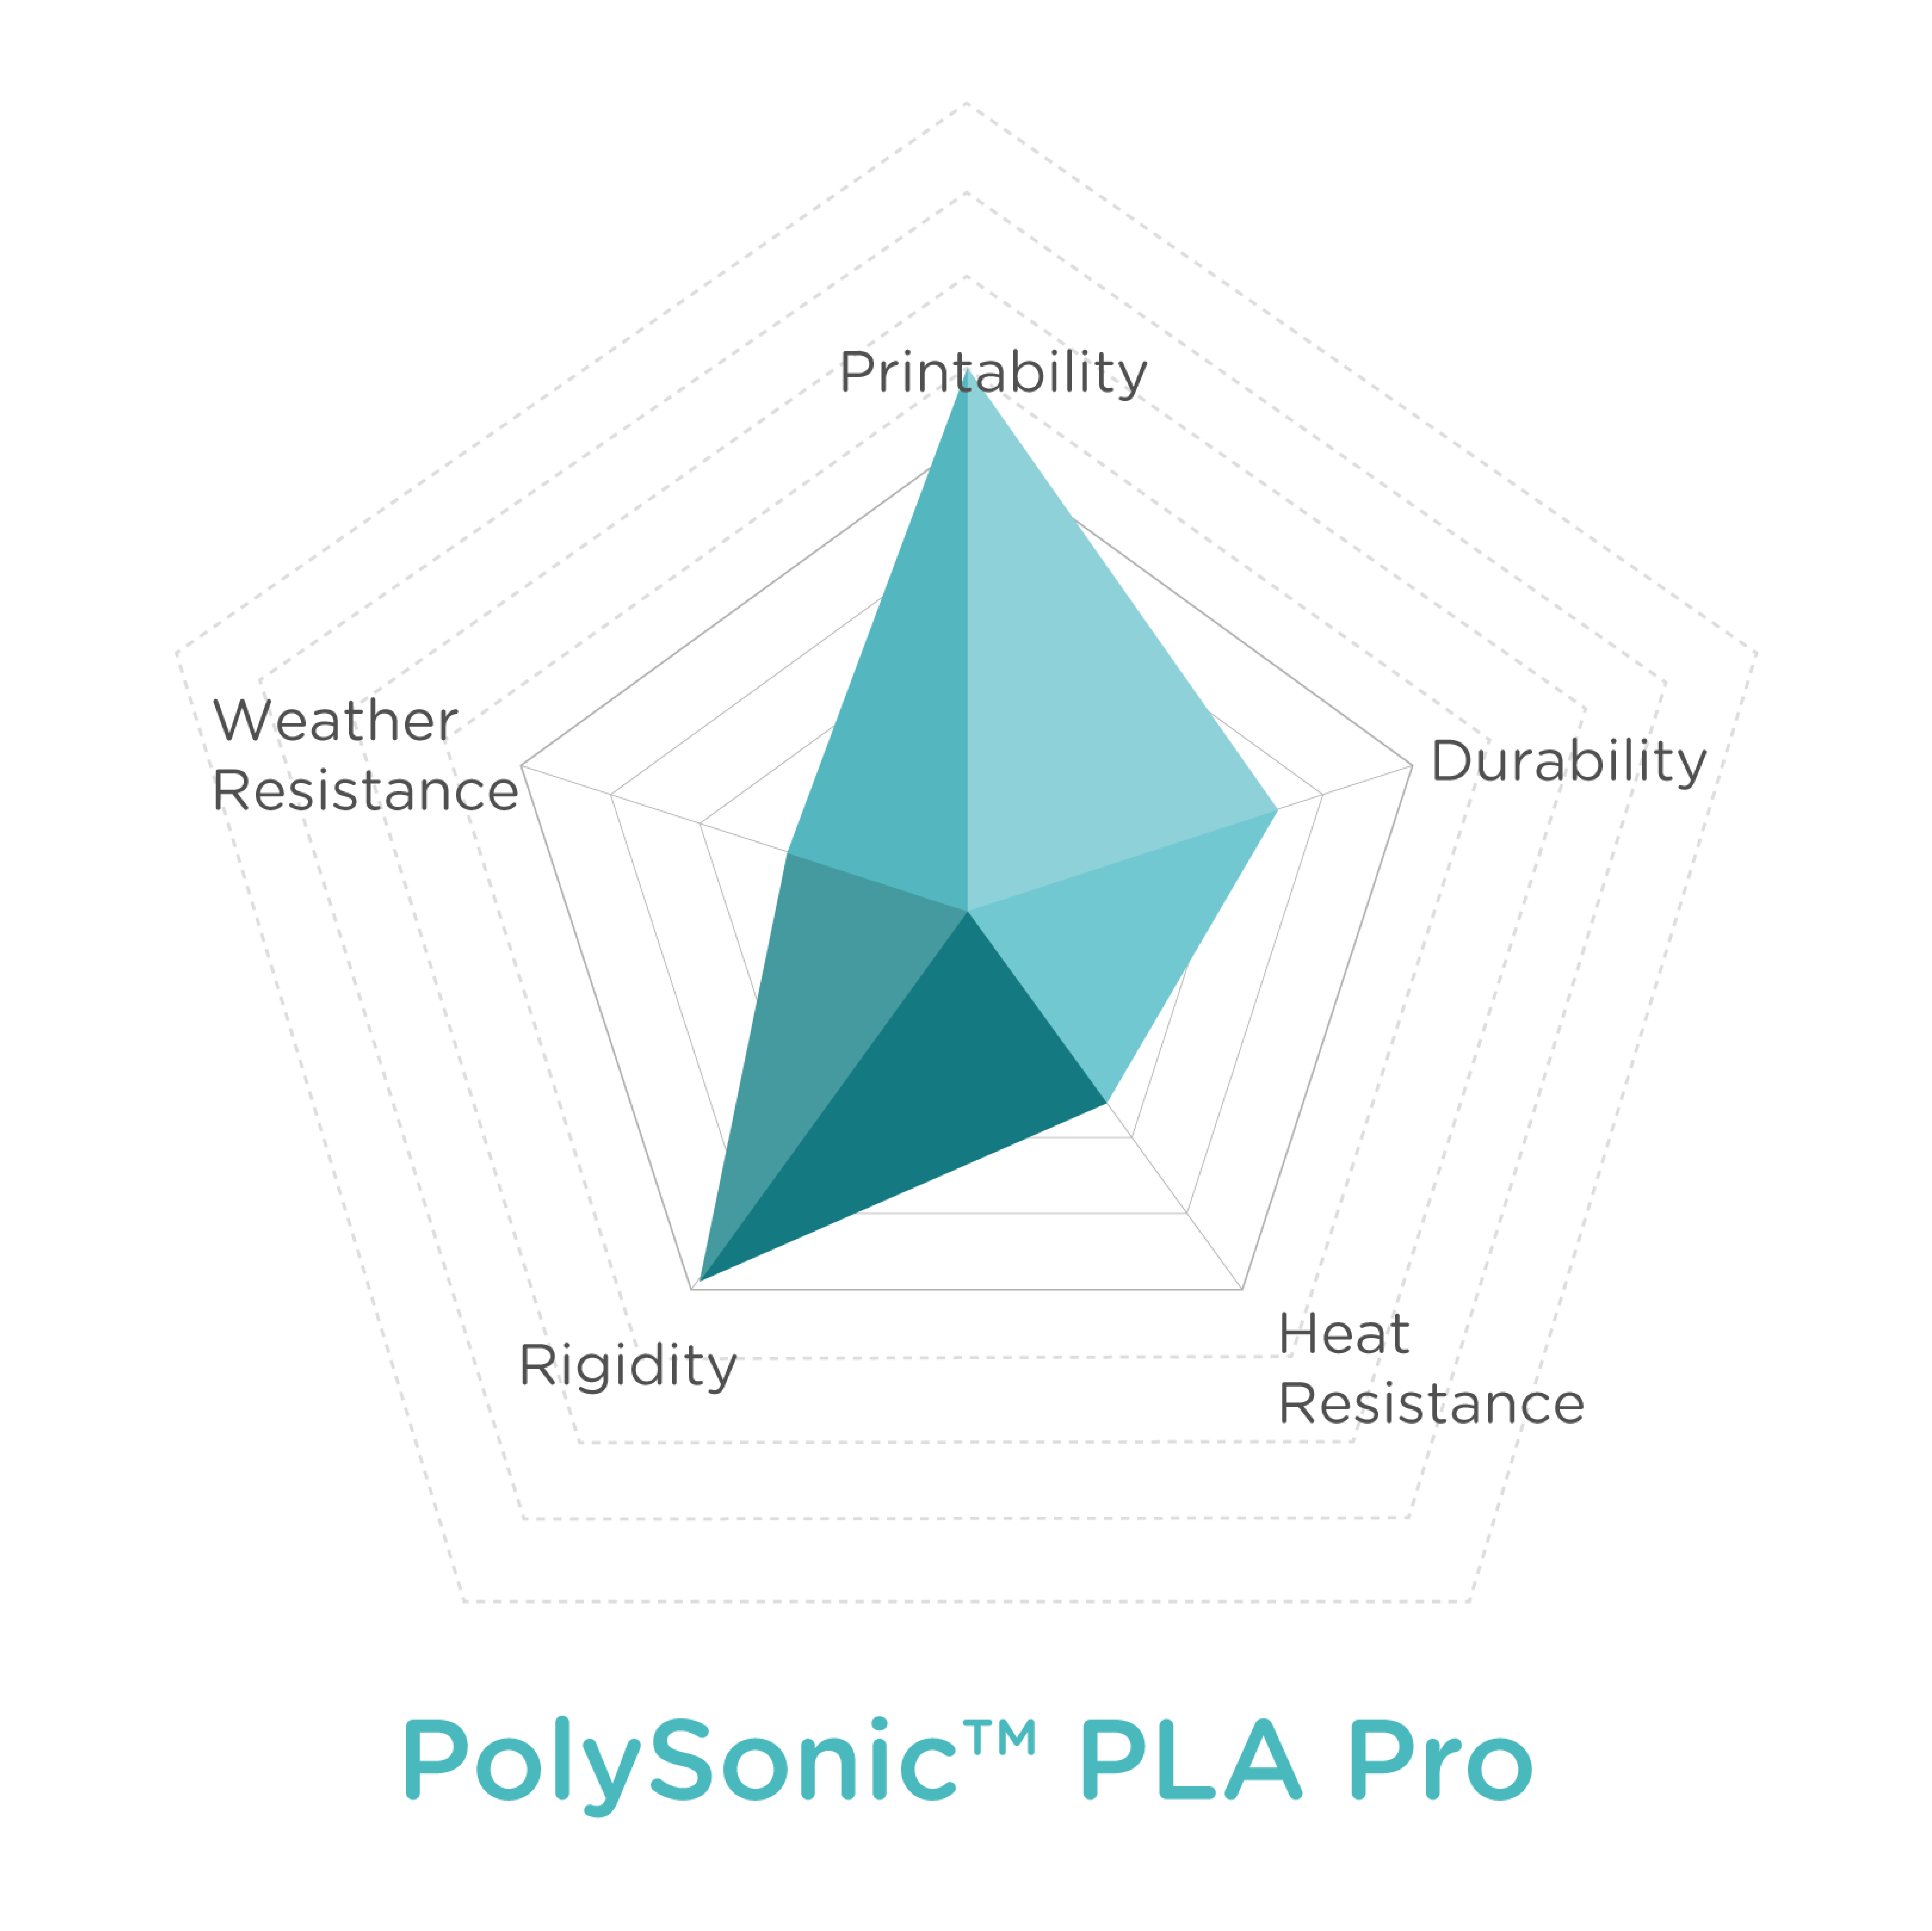 Polymaker: The Brand in a Nutshell